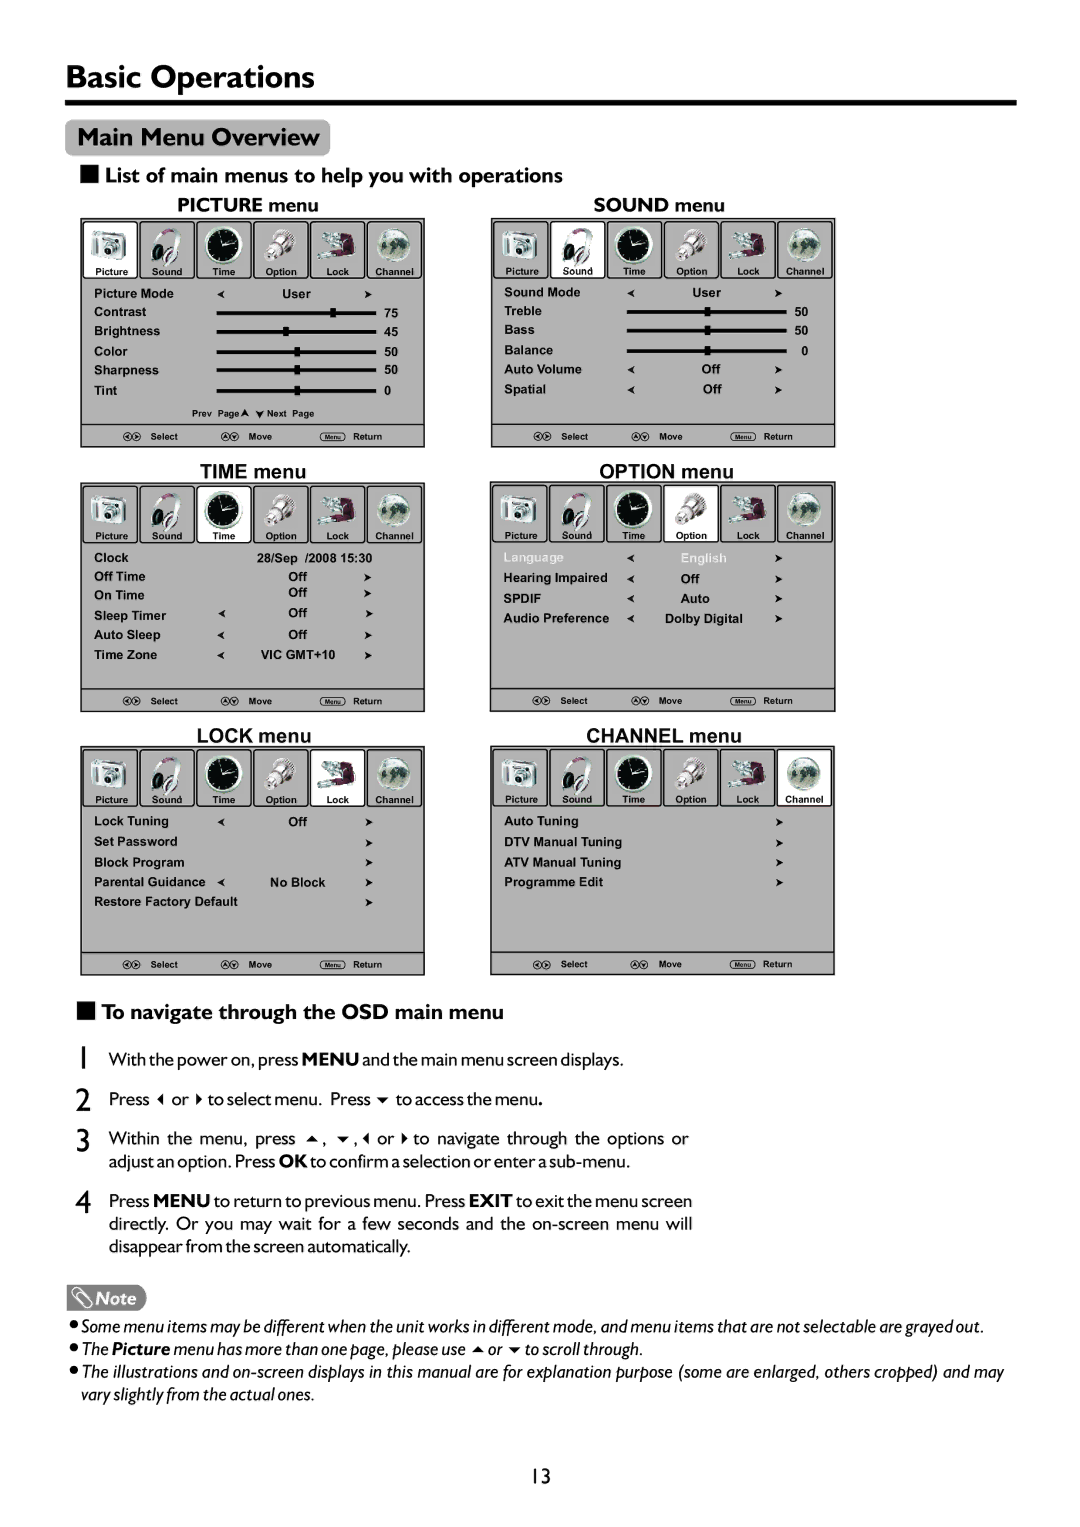 Palsonic TFTV322FHD owner manual Basic Operations, Main Menu Overview, List of main menus to help you with operations 